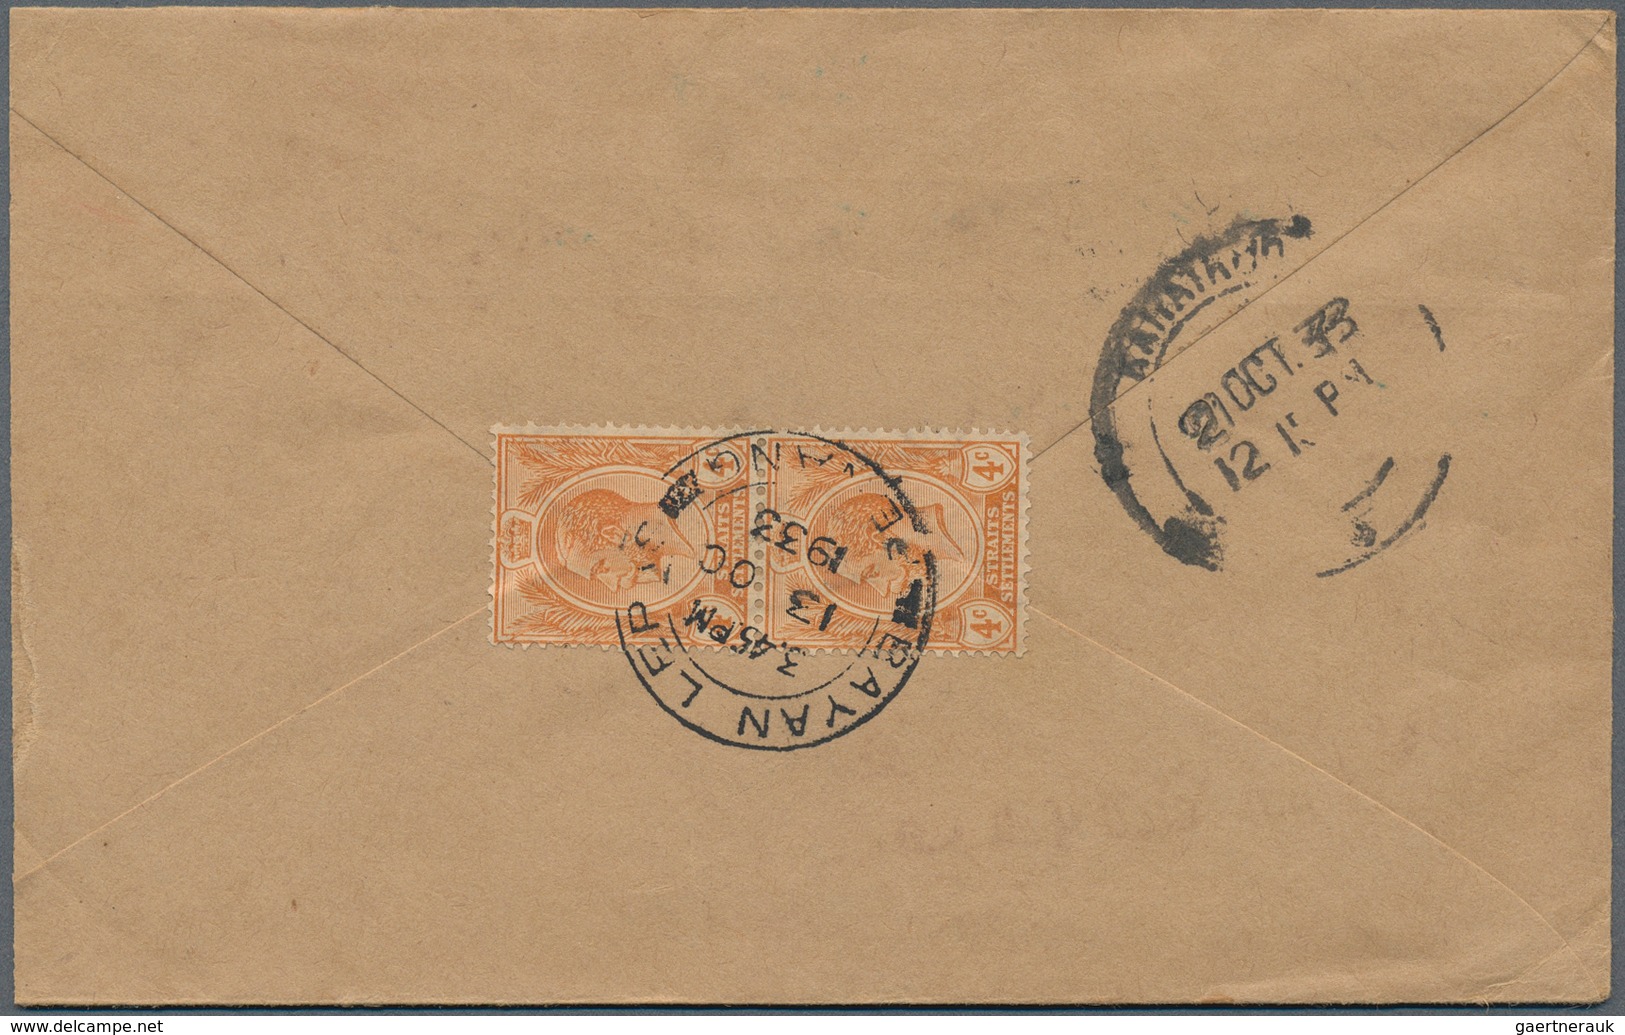 Malaiische Staaten - Penang: 1931, BAYAN LEPAS: Incoming Unfranked Cover From India Addressed To Bay - Penang